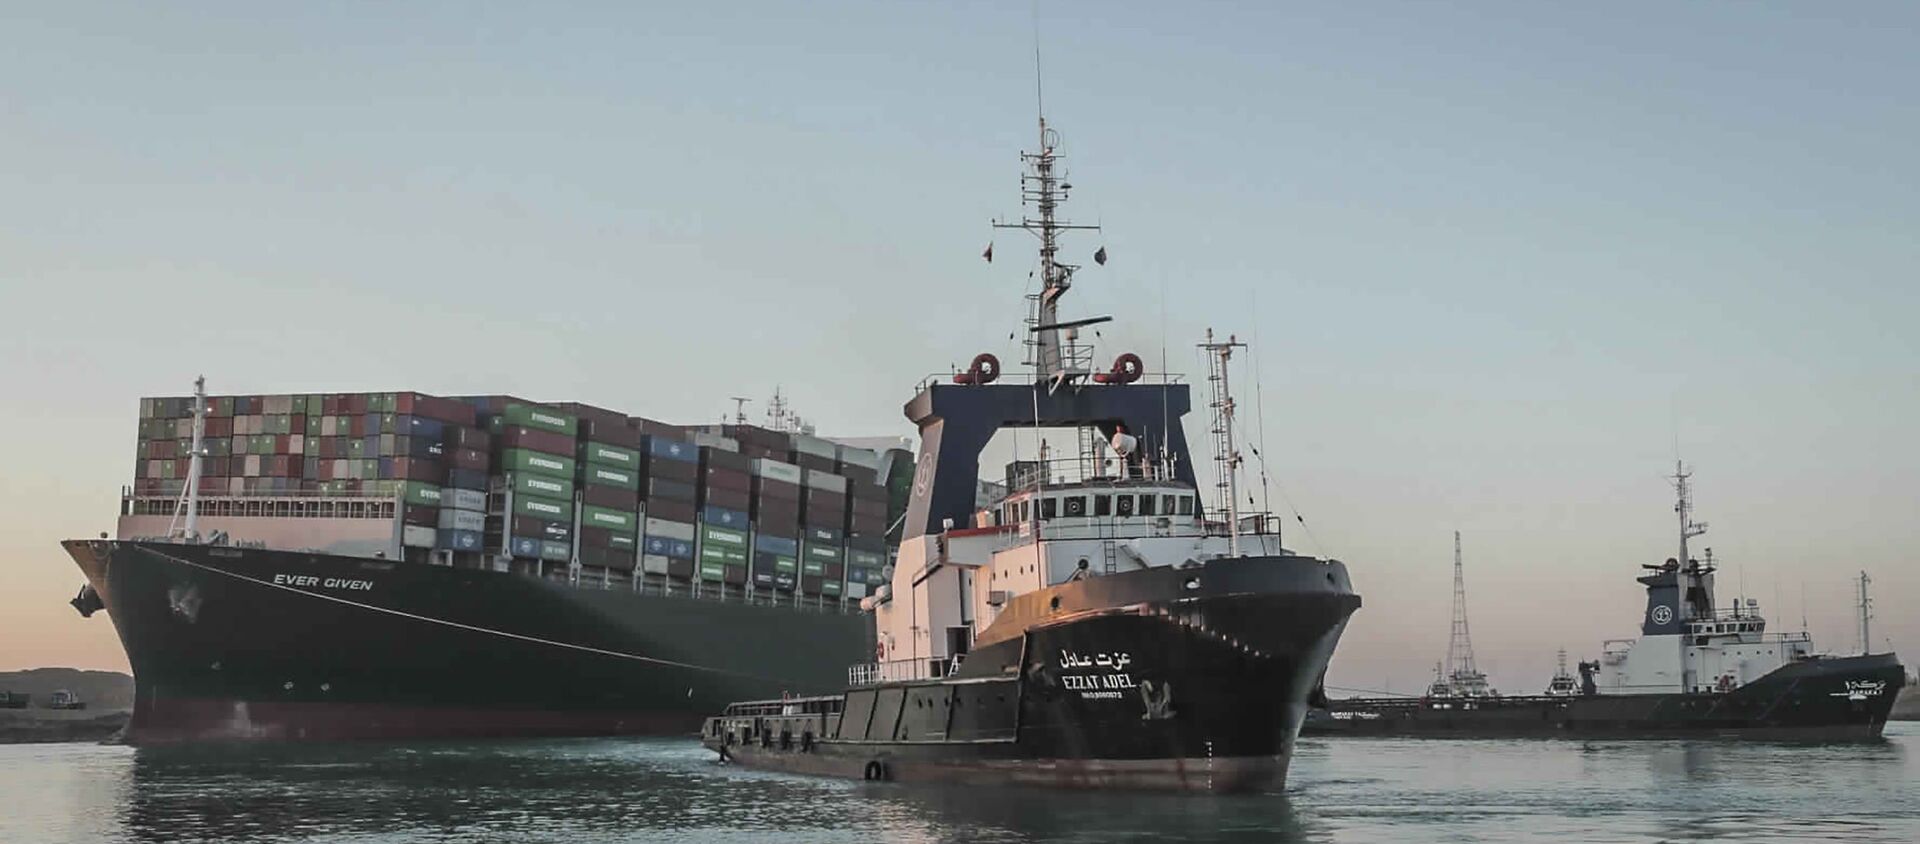 In this photo released by Suez Canal Authority, the Ever Given, a Panama-flagged cargo ship is pulled by one of the Suez Canal tugboats, in the Suez Canal, Egypt, Monday, March 29, 2021 - Sputnik International, 1920, 26.04.2021